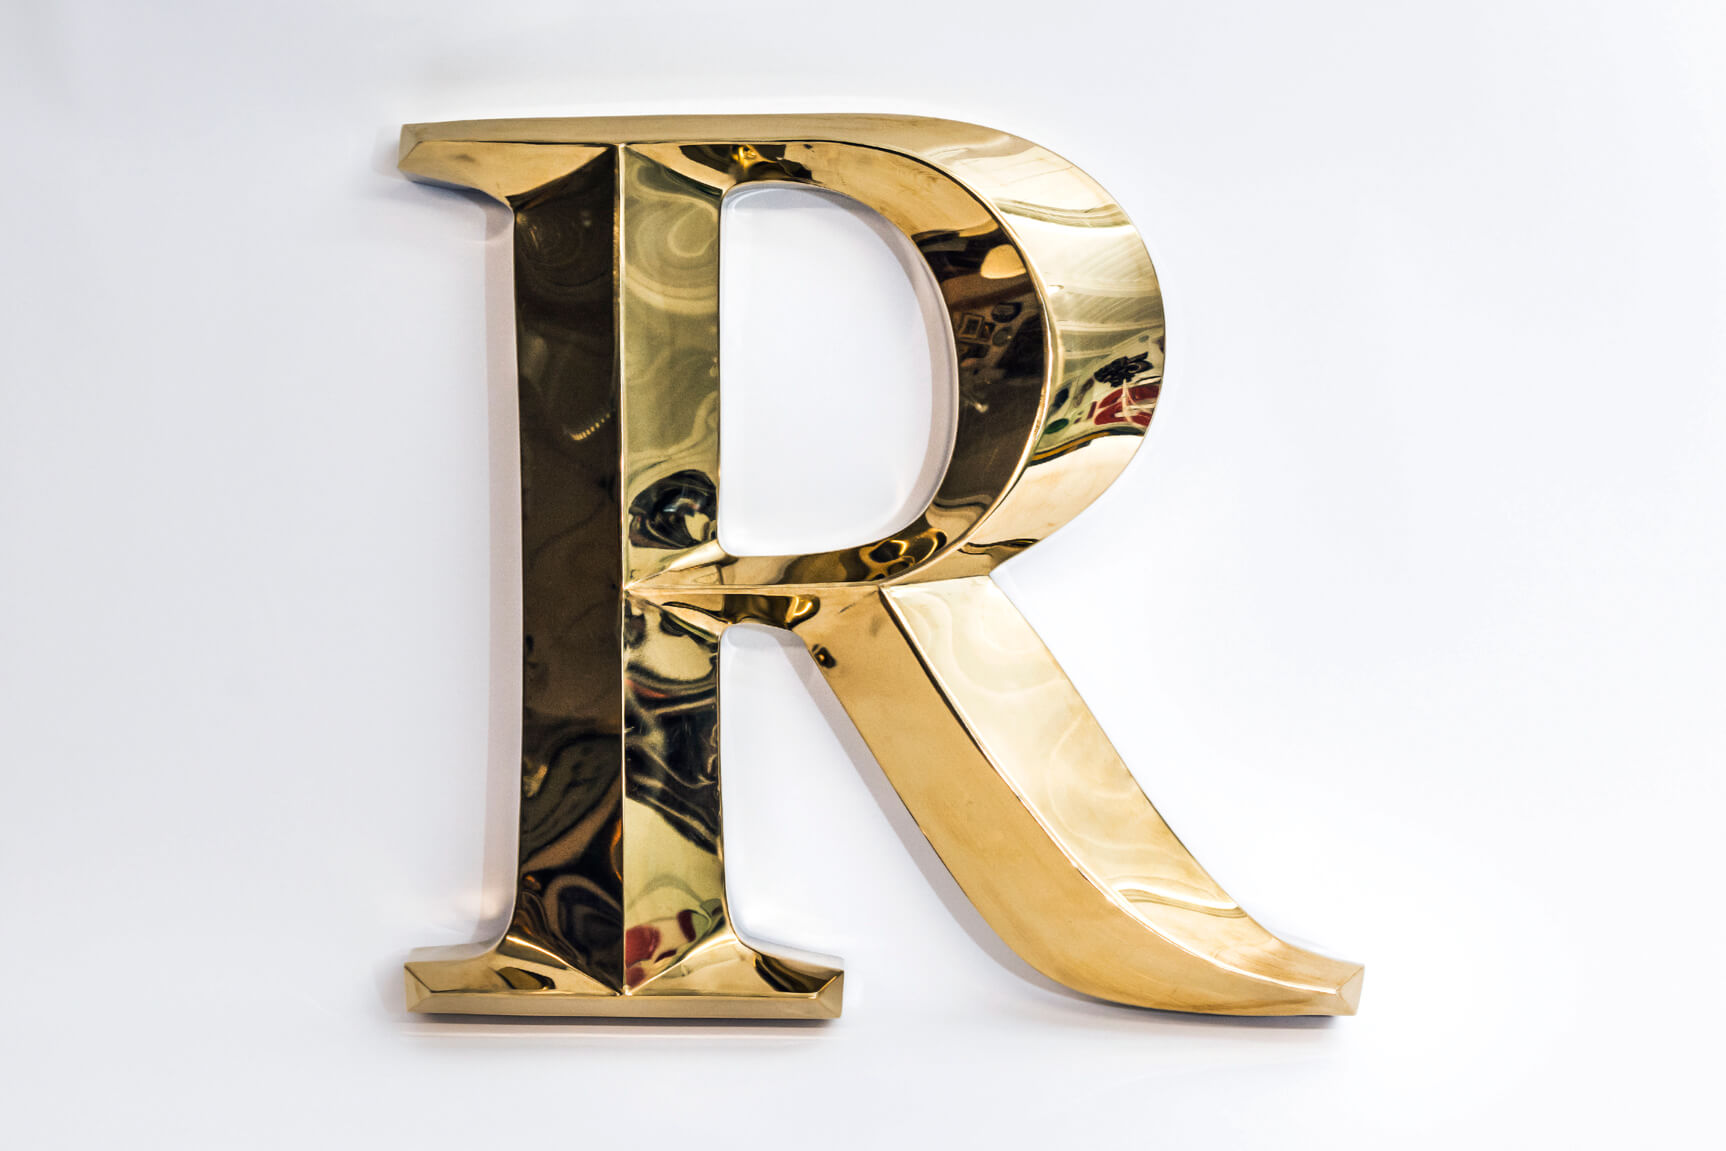 letters prismatic - Gold prismatic letters made of metal